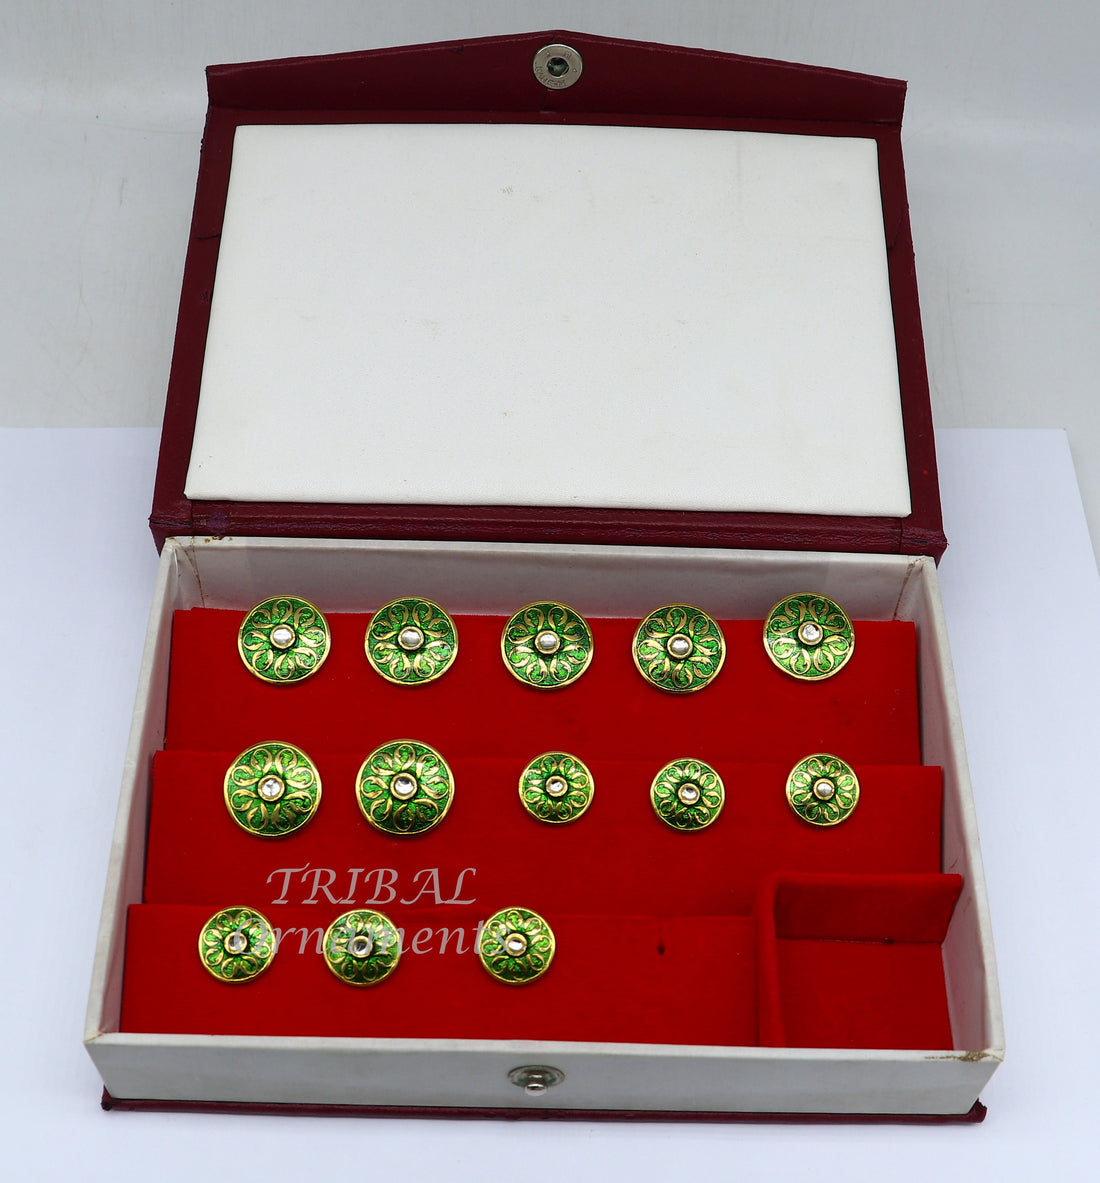 Green color enamel 925 Sterling silver handcrafted design buttons set of 13 pc for men's coat or suit, best jewelry for all occasions btn24 - TRIBAL ORNAMENTS